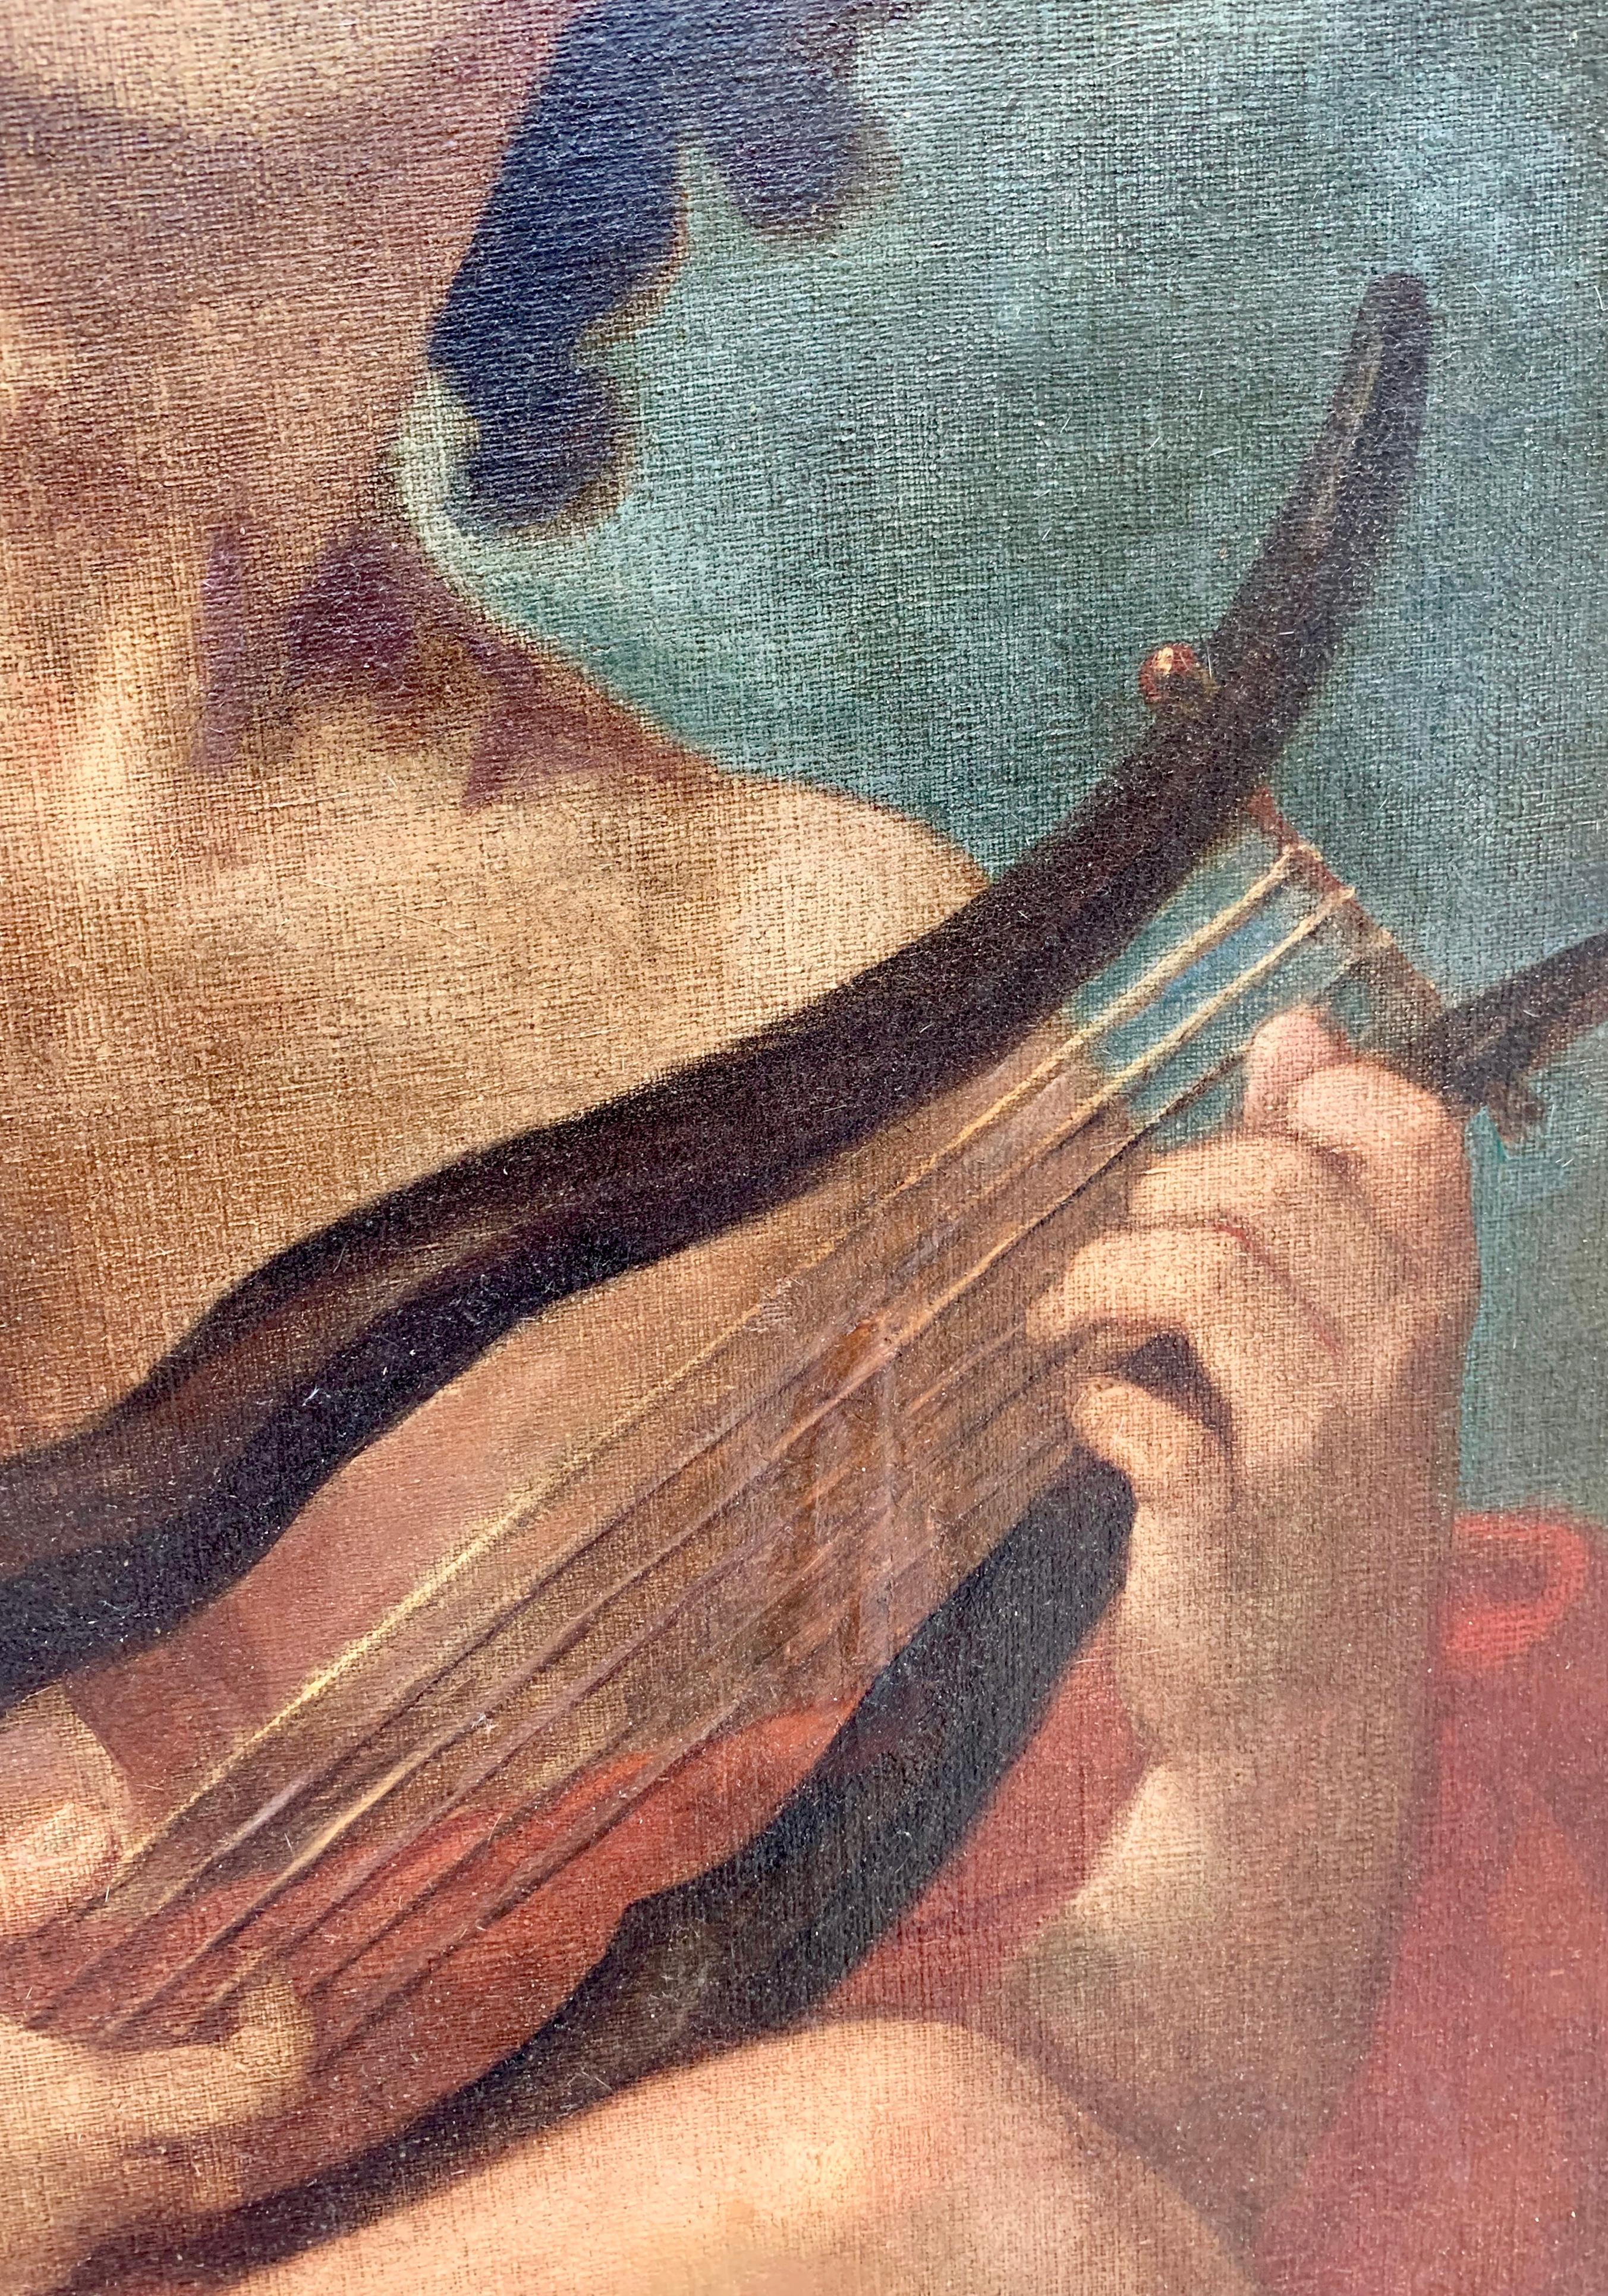 This is a portrait painting of the Greek god Apollo, wearing a red cloak and playing the lyre. This is painted by French artist Charles Joseph Natoire from the 18th century. It has a wax sealed red stamp on the back.

Oil on canvas.

Overall